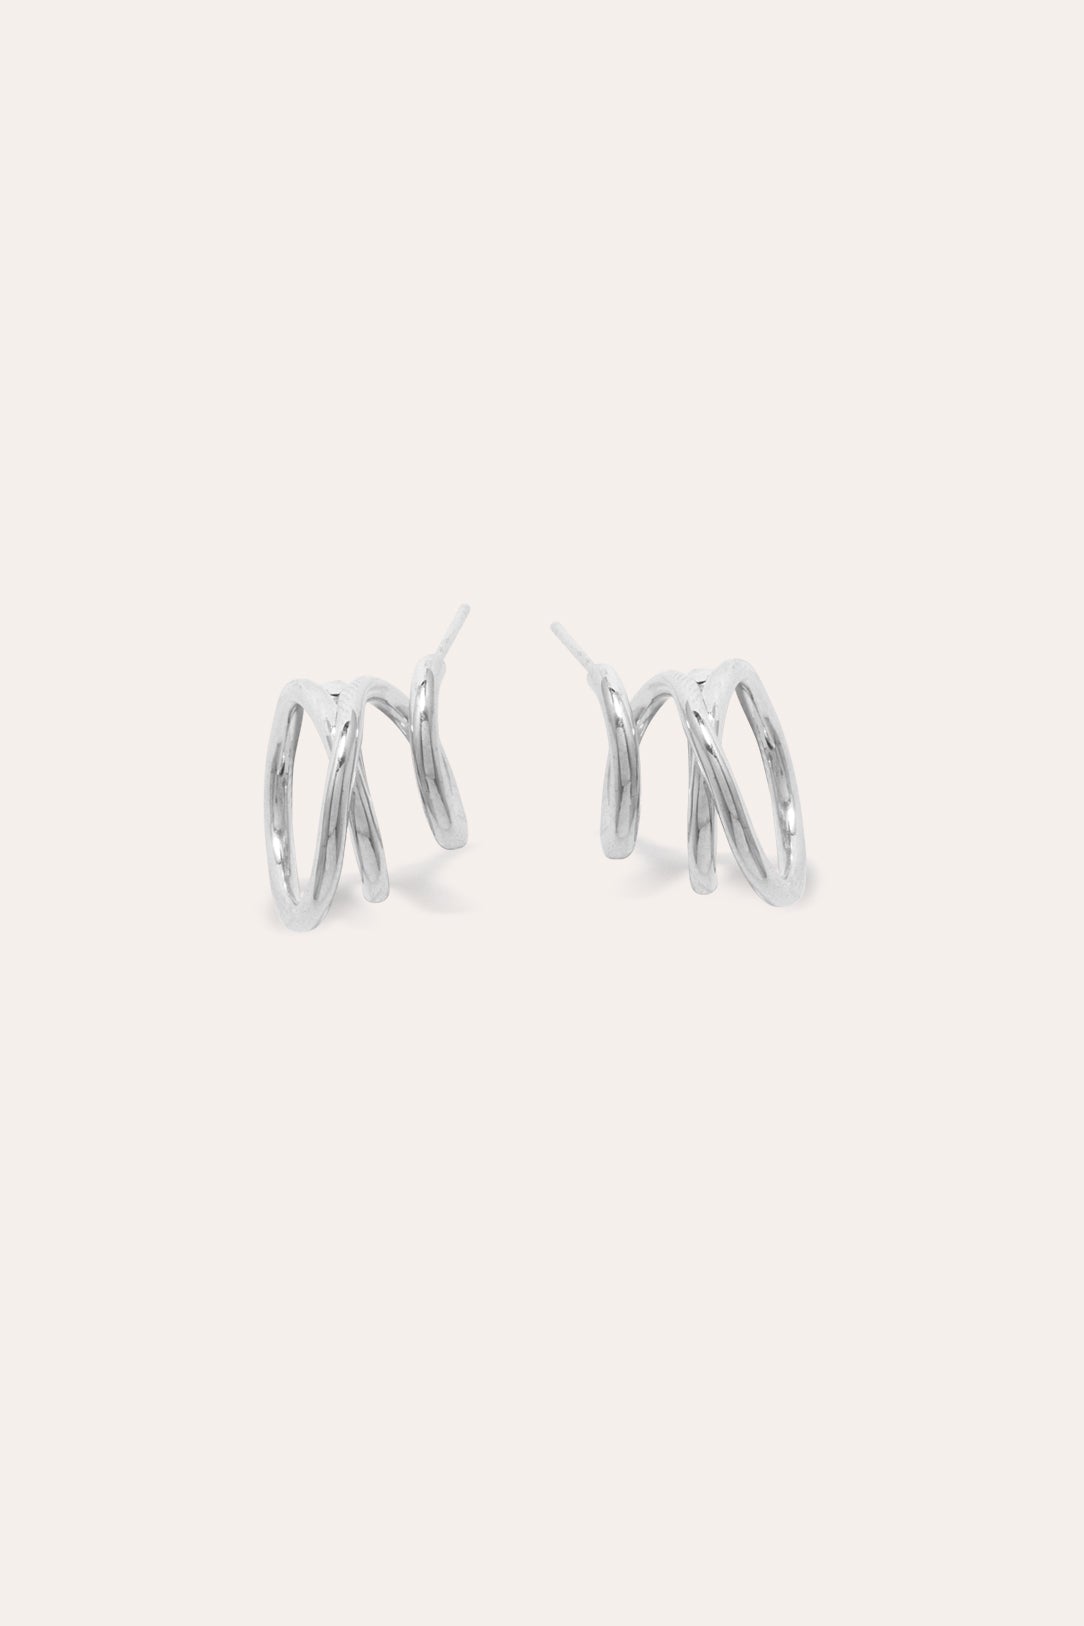 Flow - Platinum Plated Earrings | Completedworks